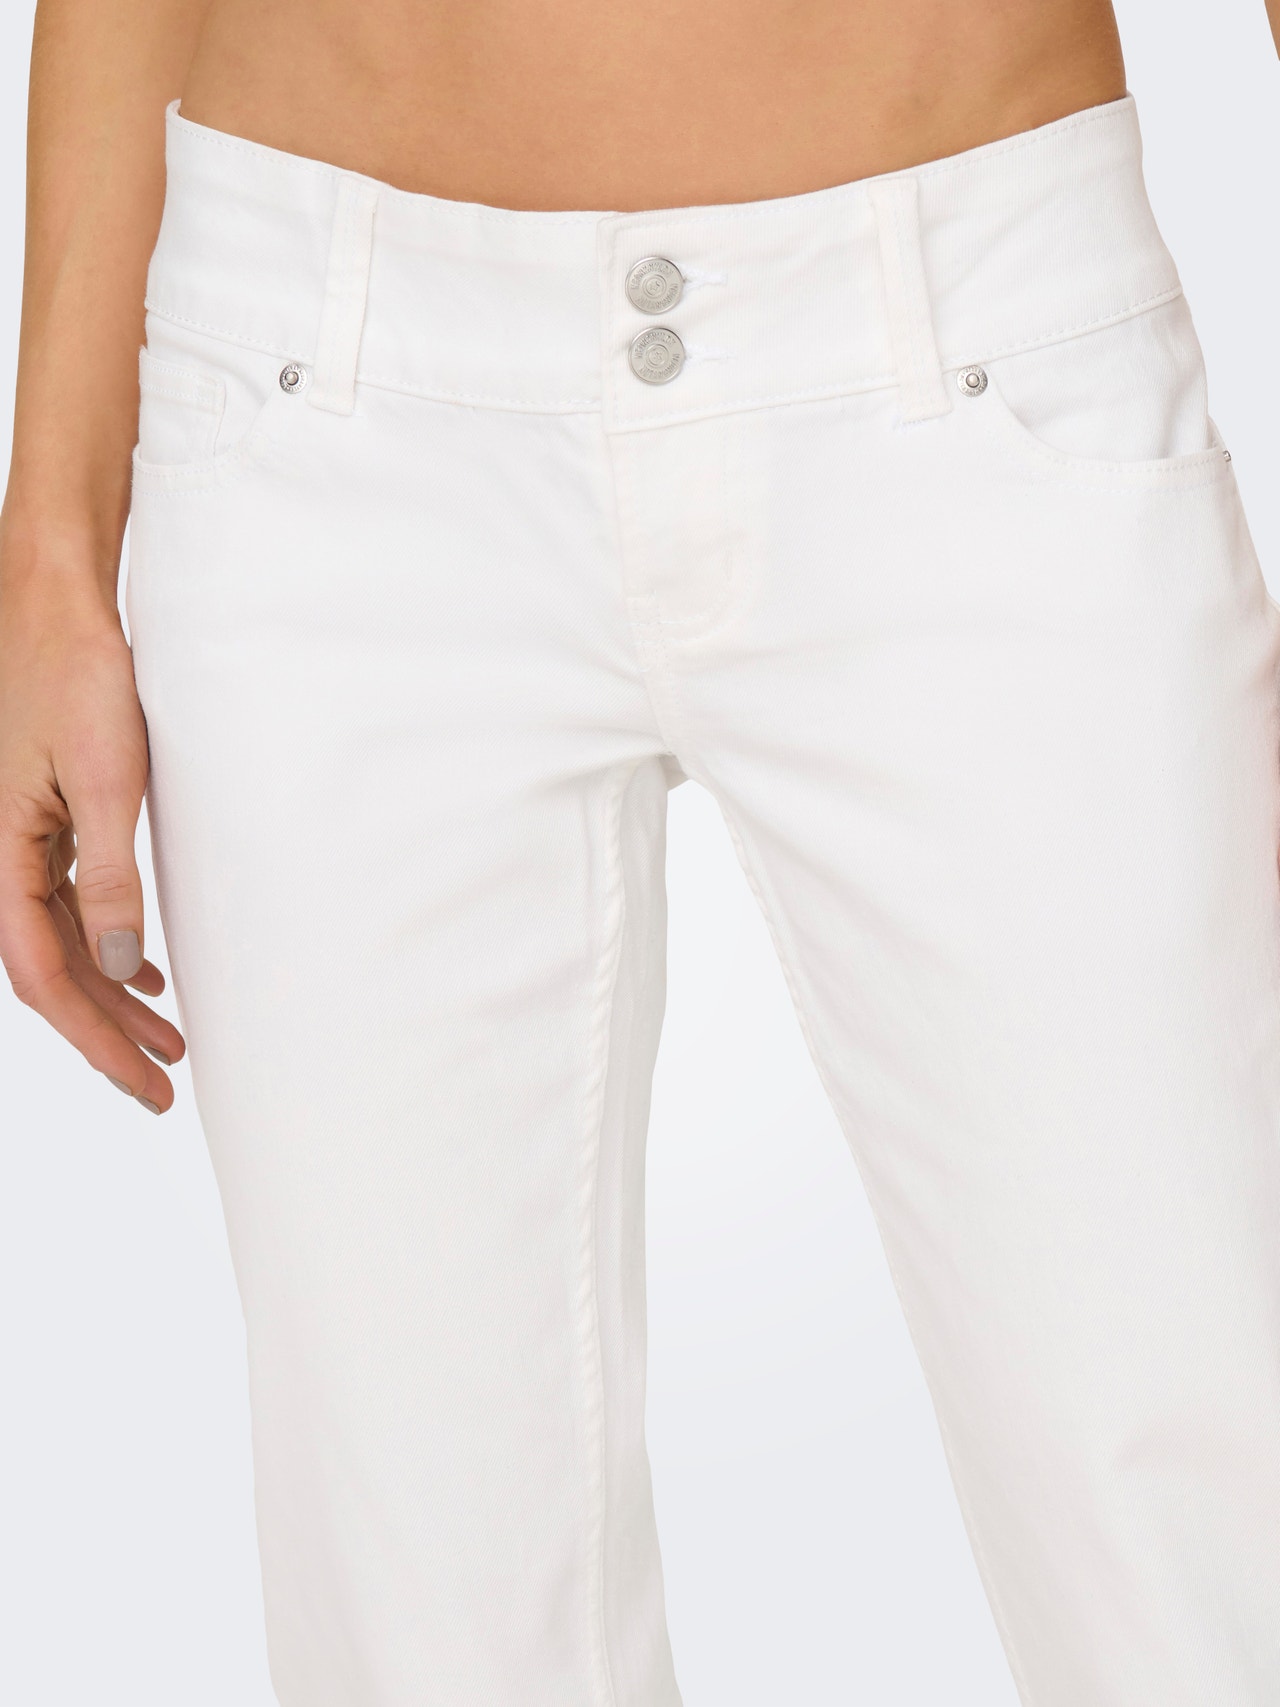 Flared Fit Super low waist Jeans with 20% discount!